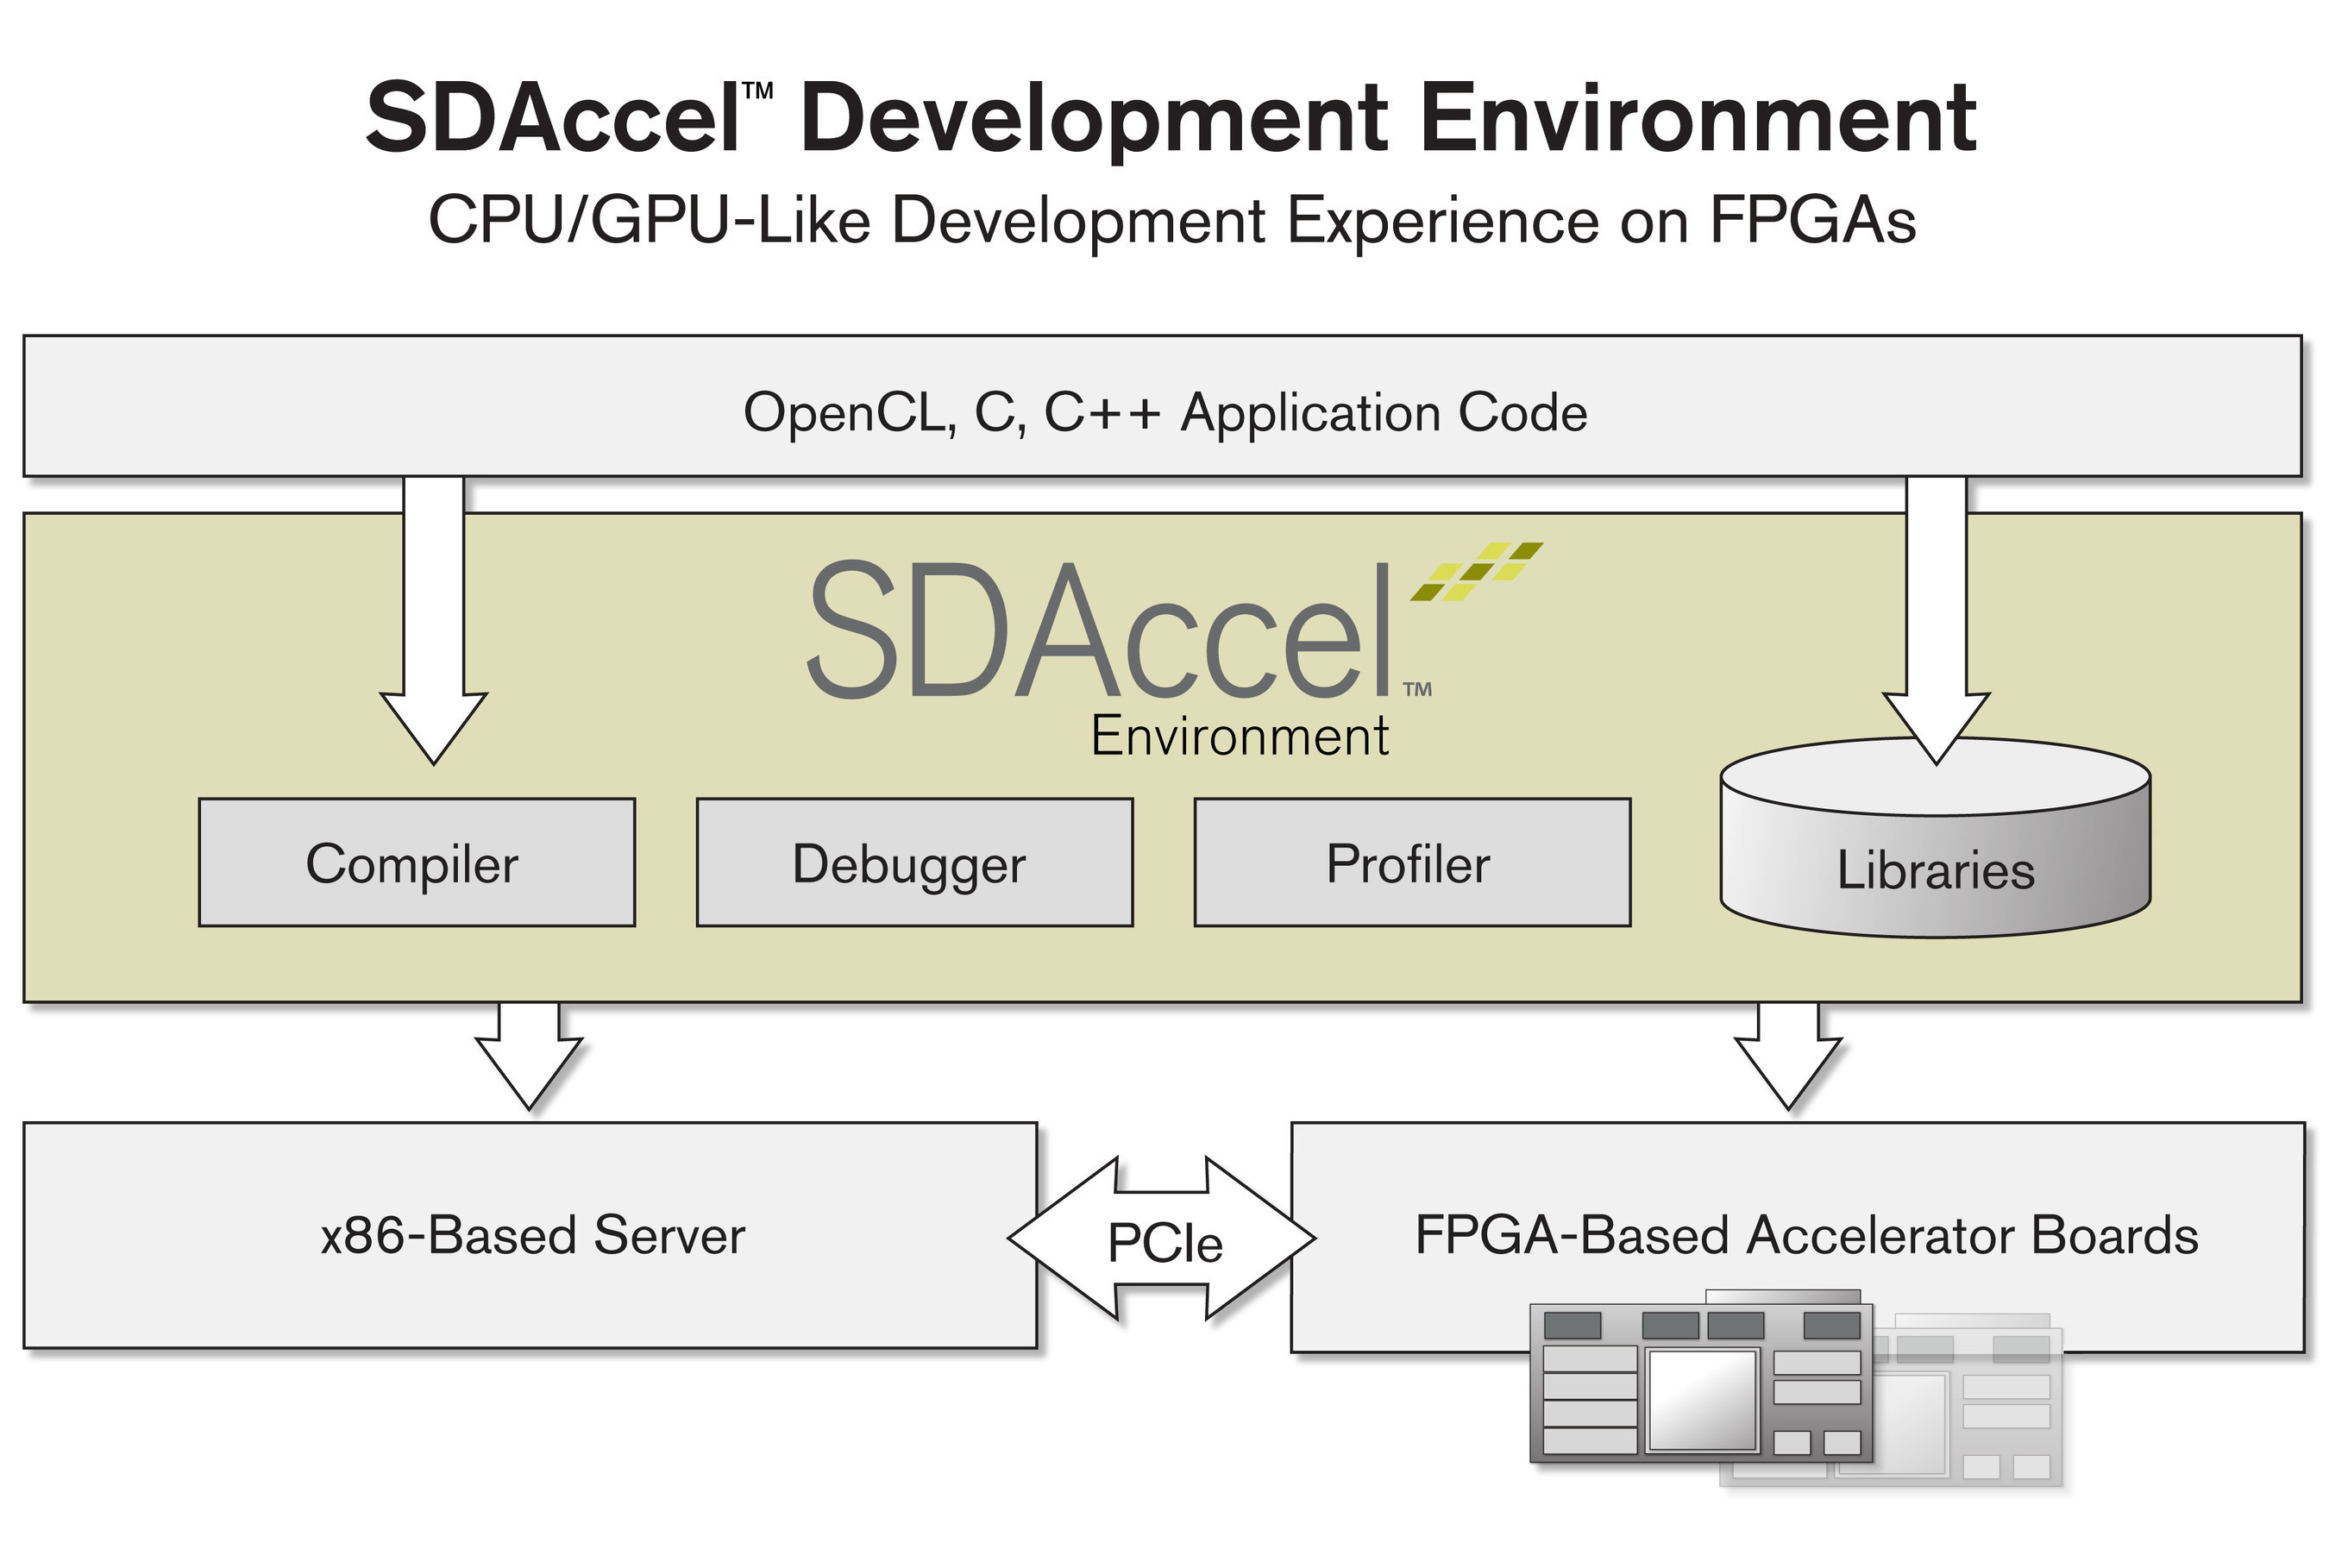 The SDAccel(TM) Development Environment includes an architecturally optimizing compiler, libraries, a debugger, and a profiler and provides a CPU/GPU-like programming experience.